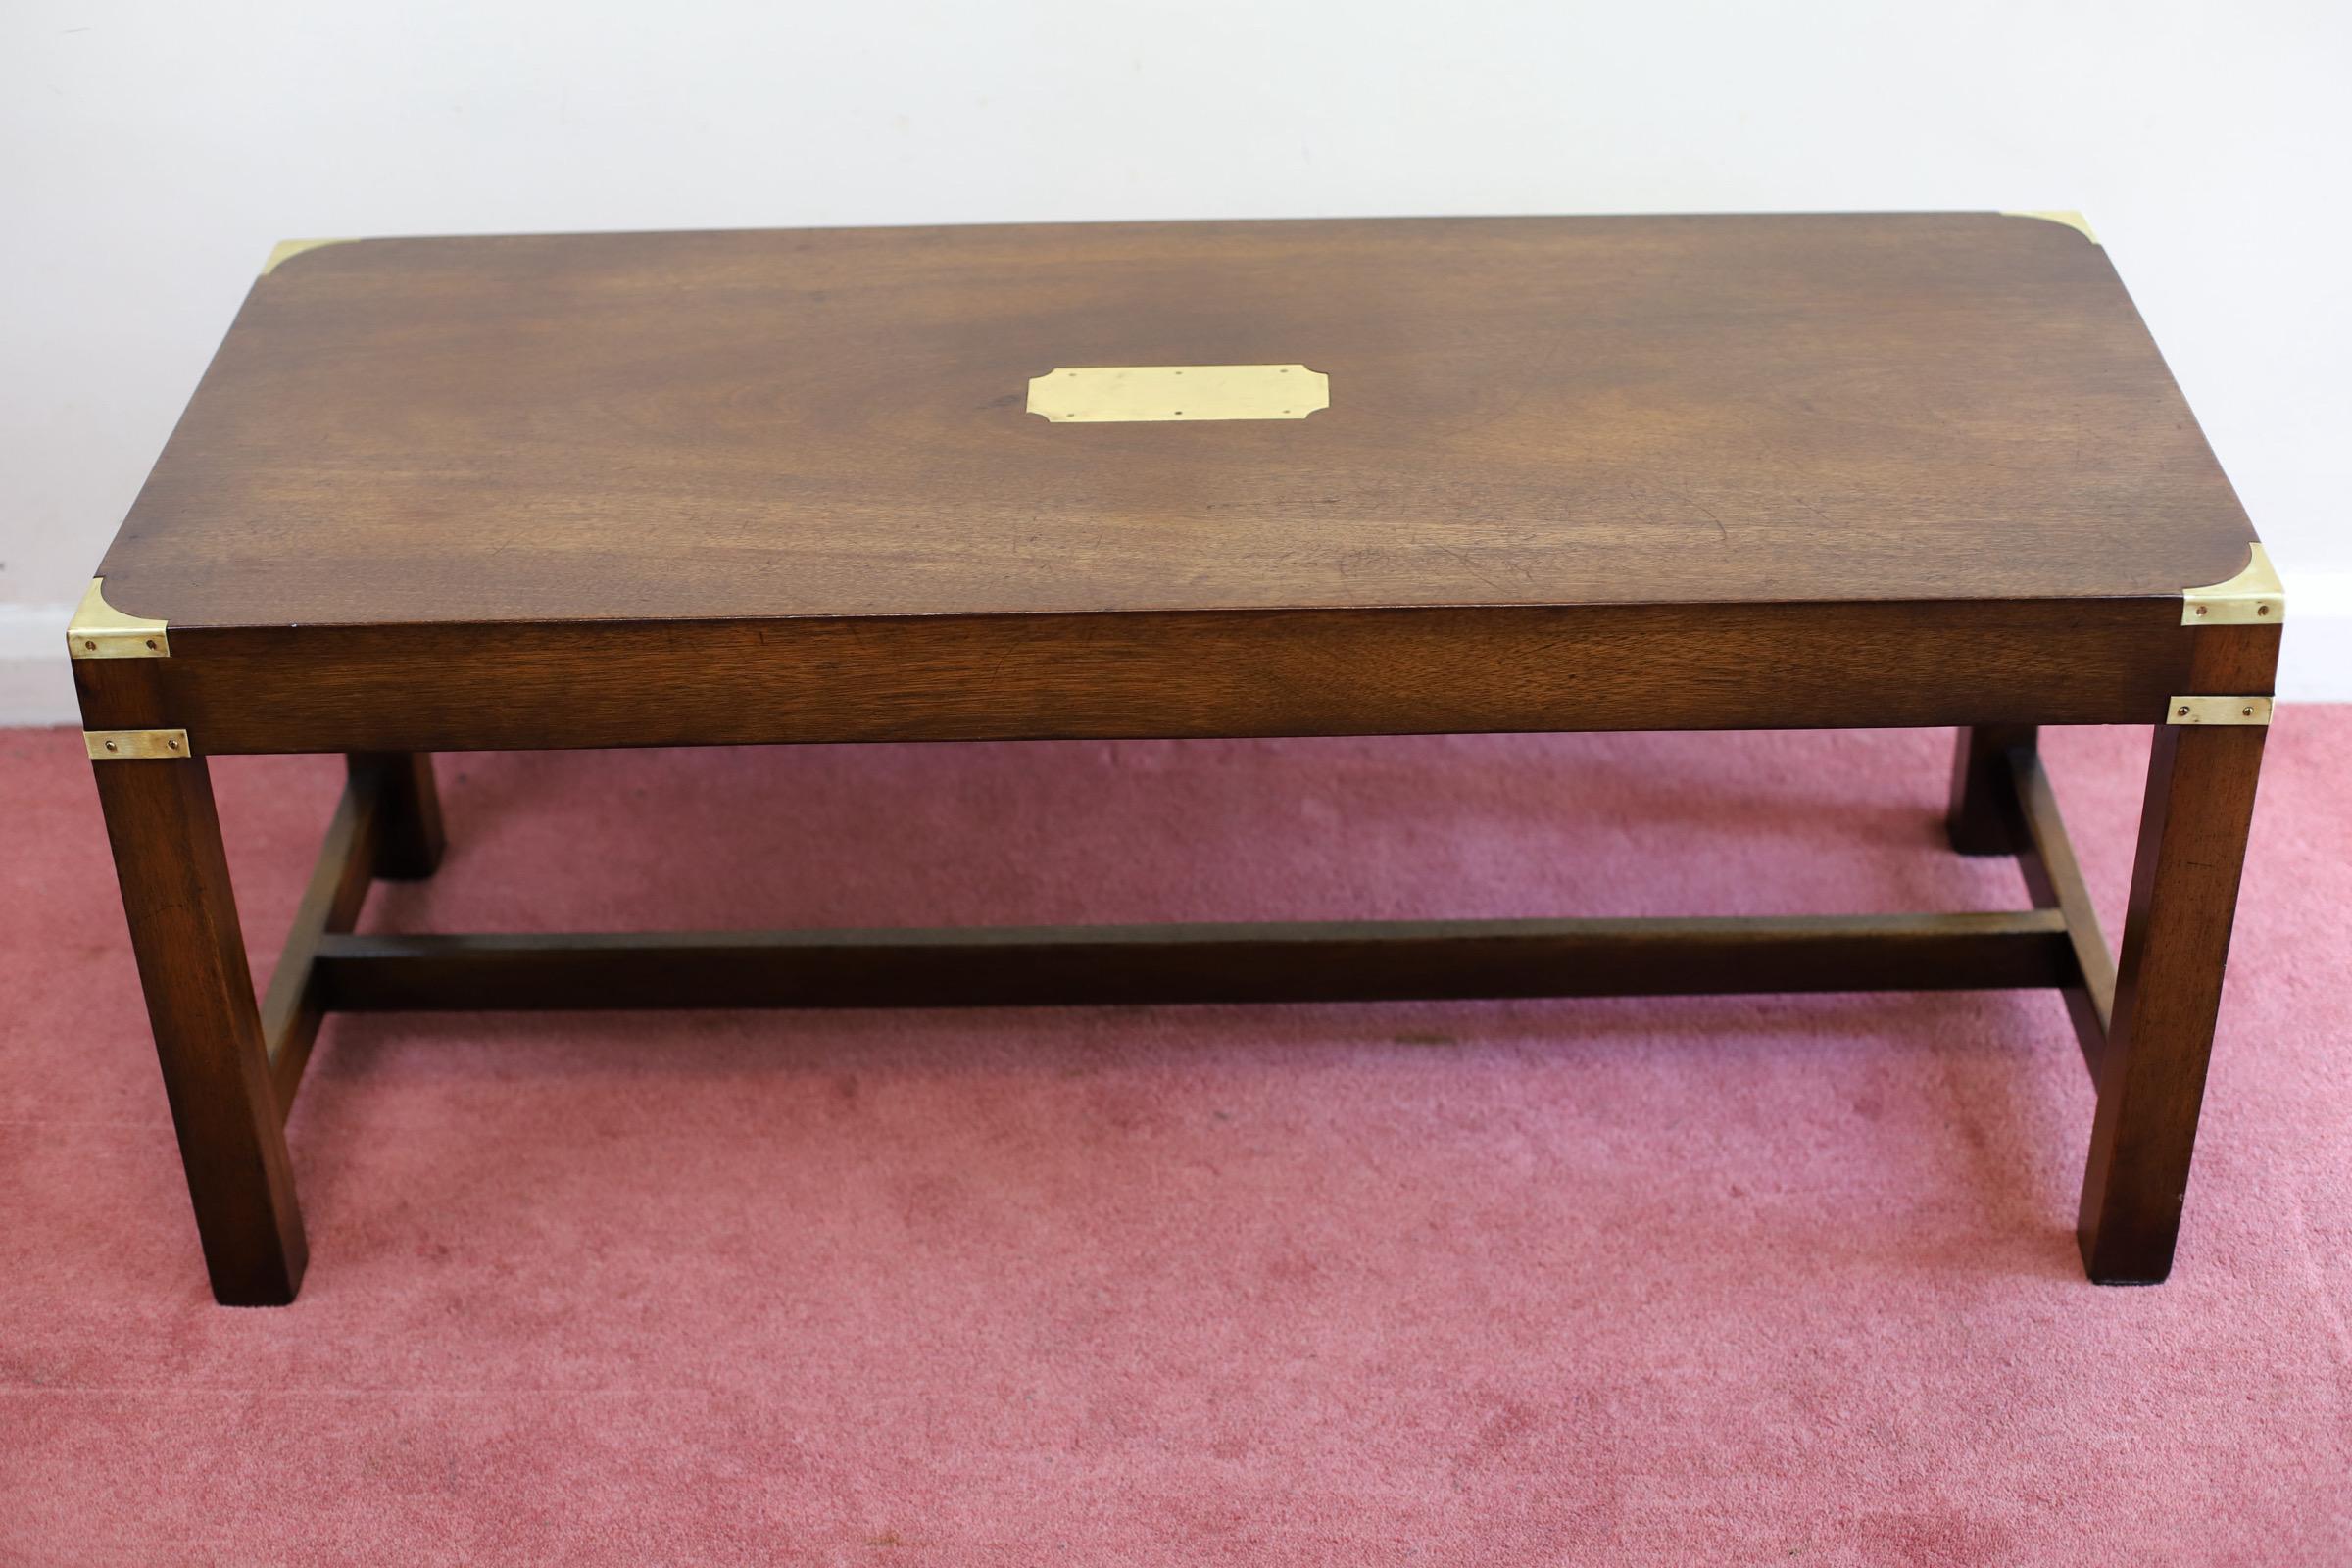 We delight to offer for sale this Beautiful Antique Campaign style oak coffee table in excellent condition . It has a brass plaque on the top & military style corner fittings. This table is very well constructed with strong legs joined by cross